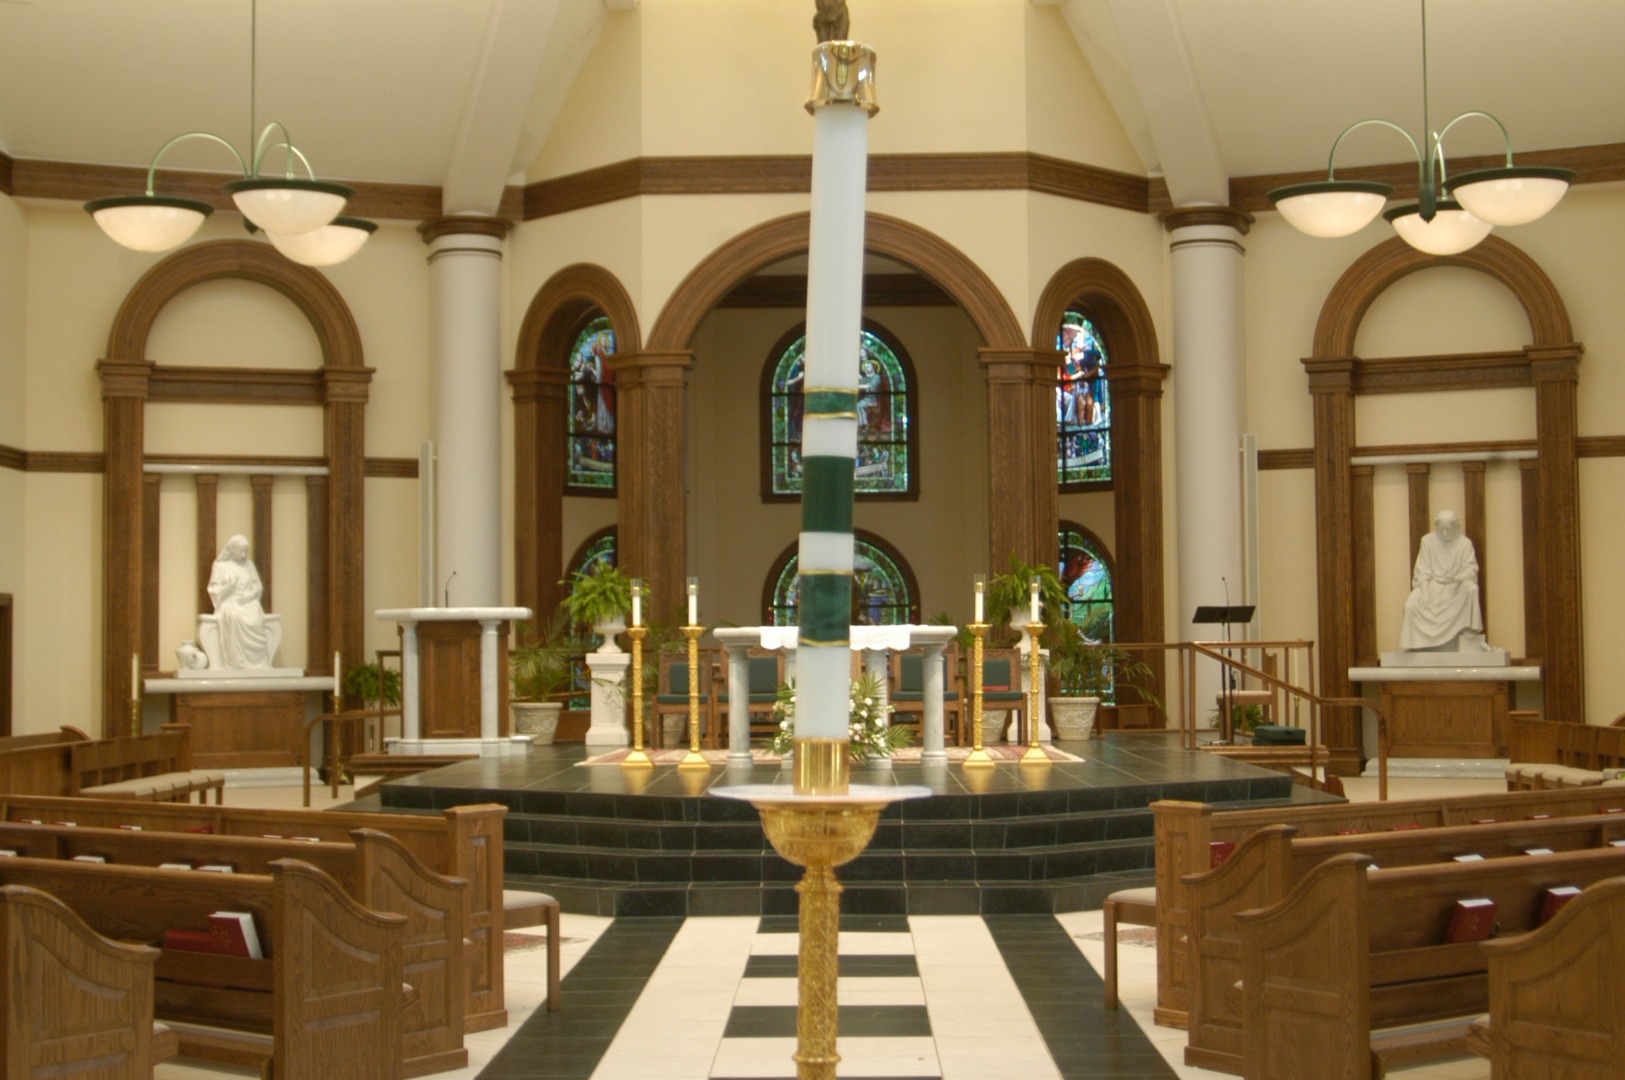 Our Lady of Mercy Interior